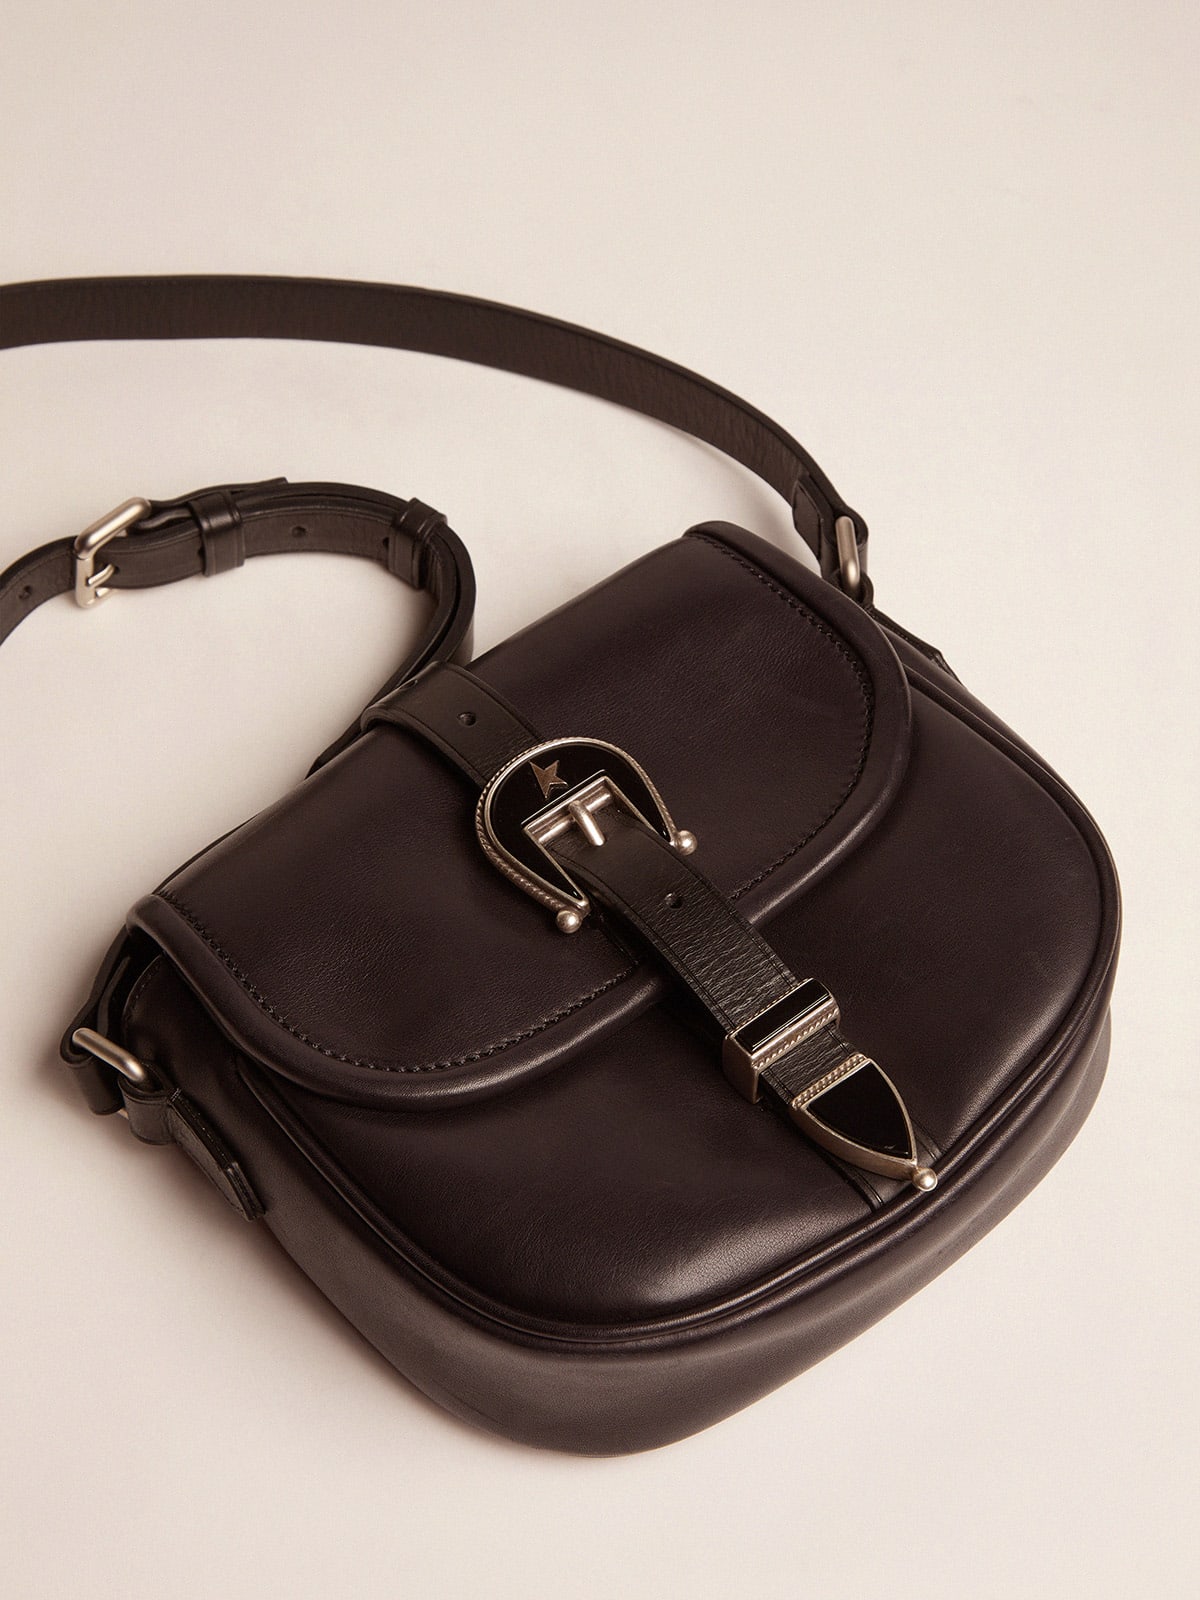 Golden Goose - Small Rodeo Bag in pelle nera   in 